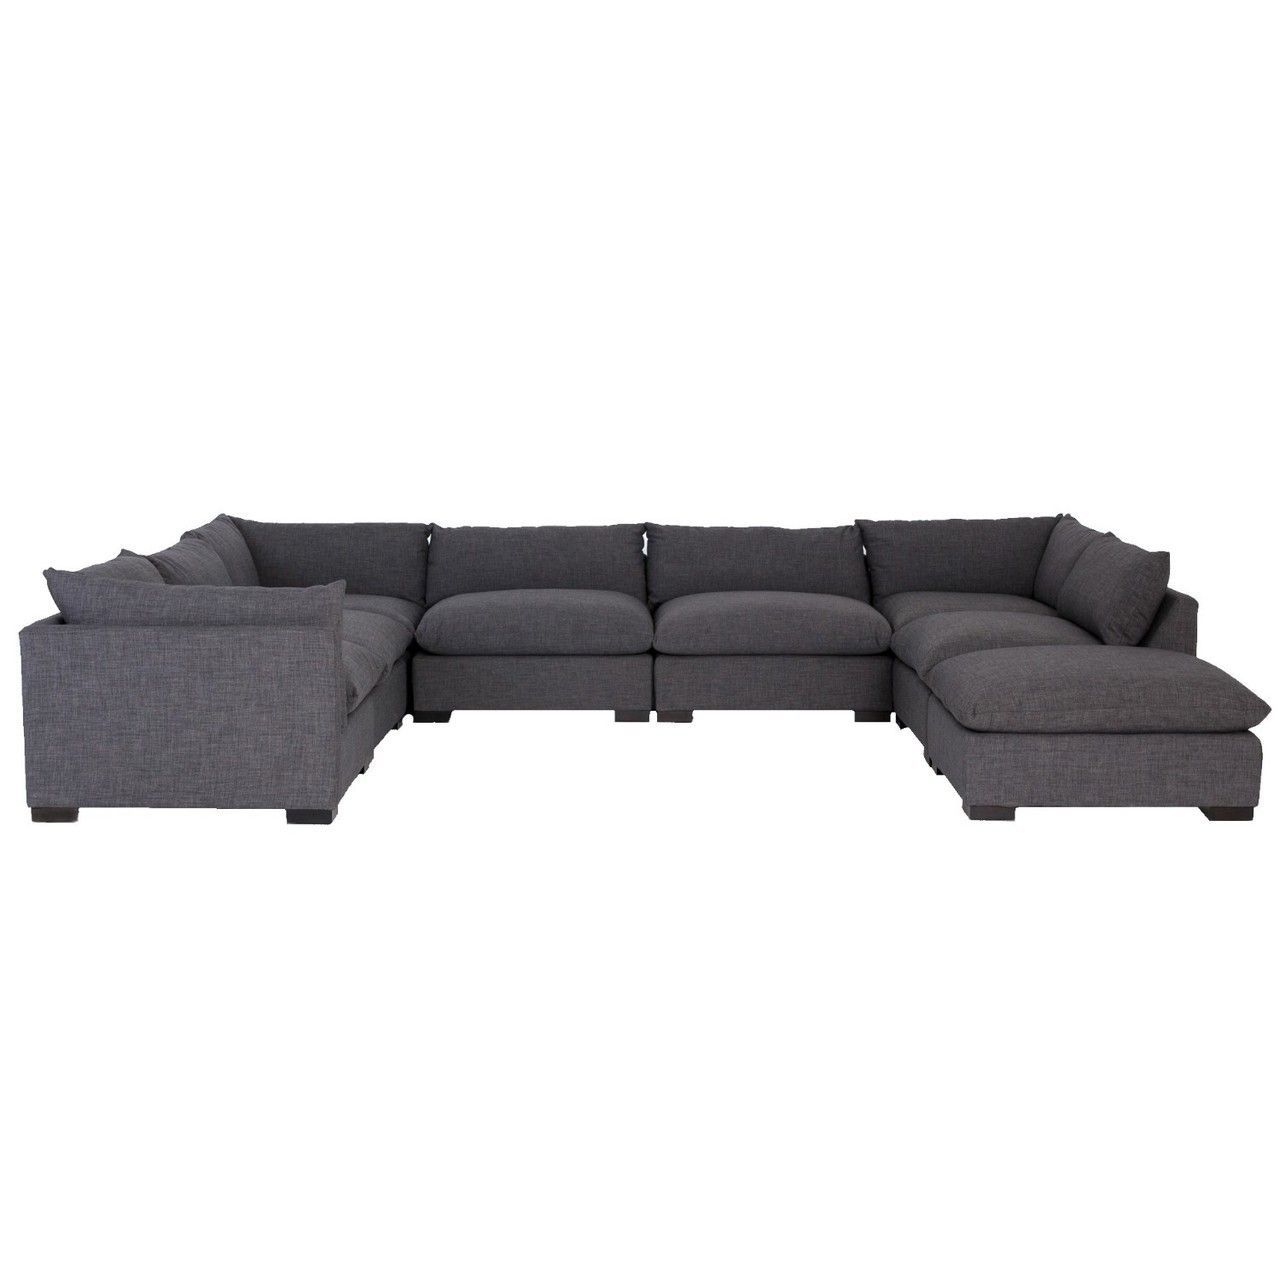 Westworld Modern Gray 8 Piece U Shape Sectional Sofa 156" | Sectional Pertaining To Modern U Shape Sectional Sofas In Gray (Gallery 5 of 20)